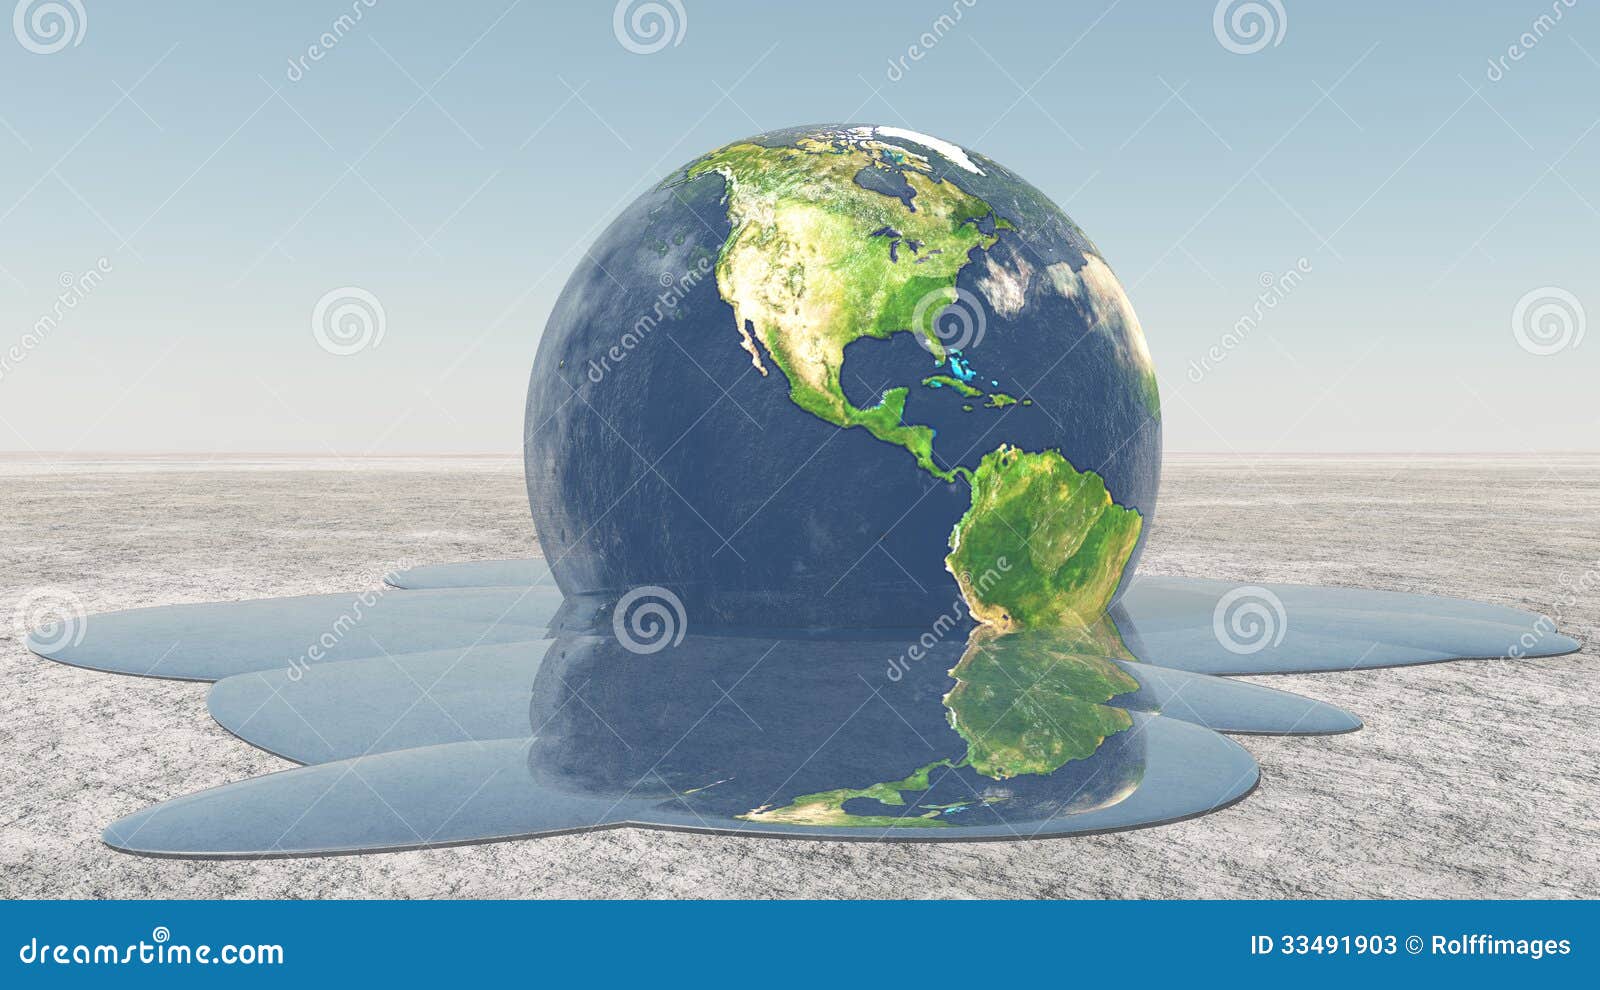 earth melting into water